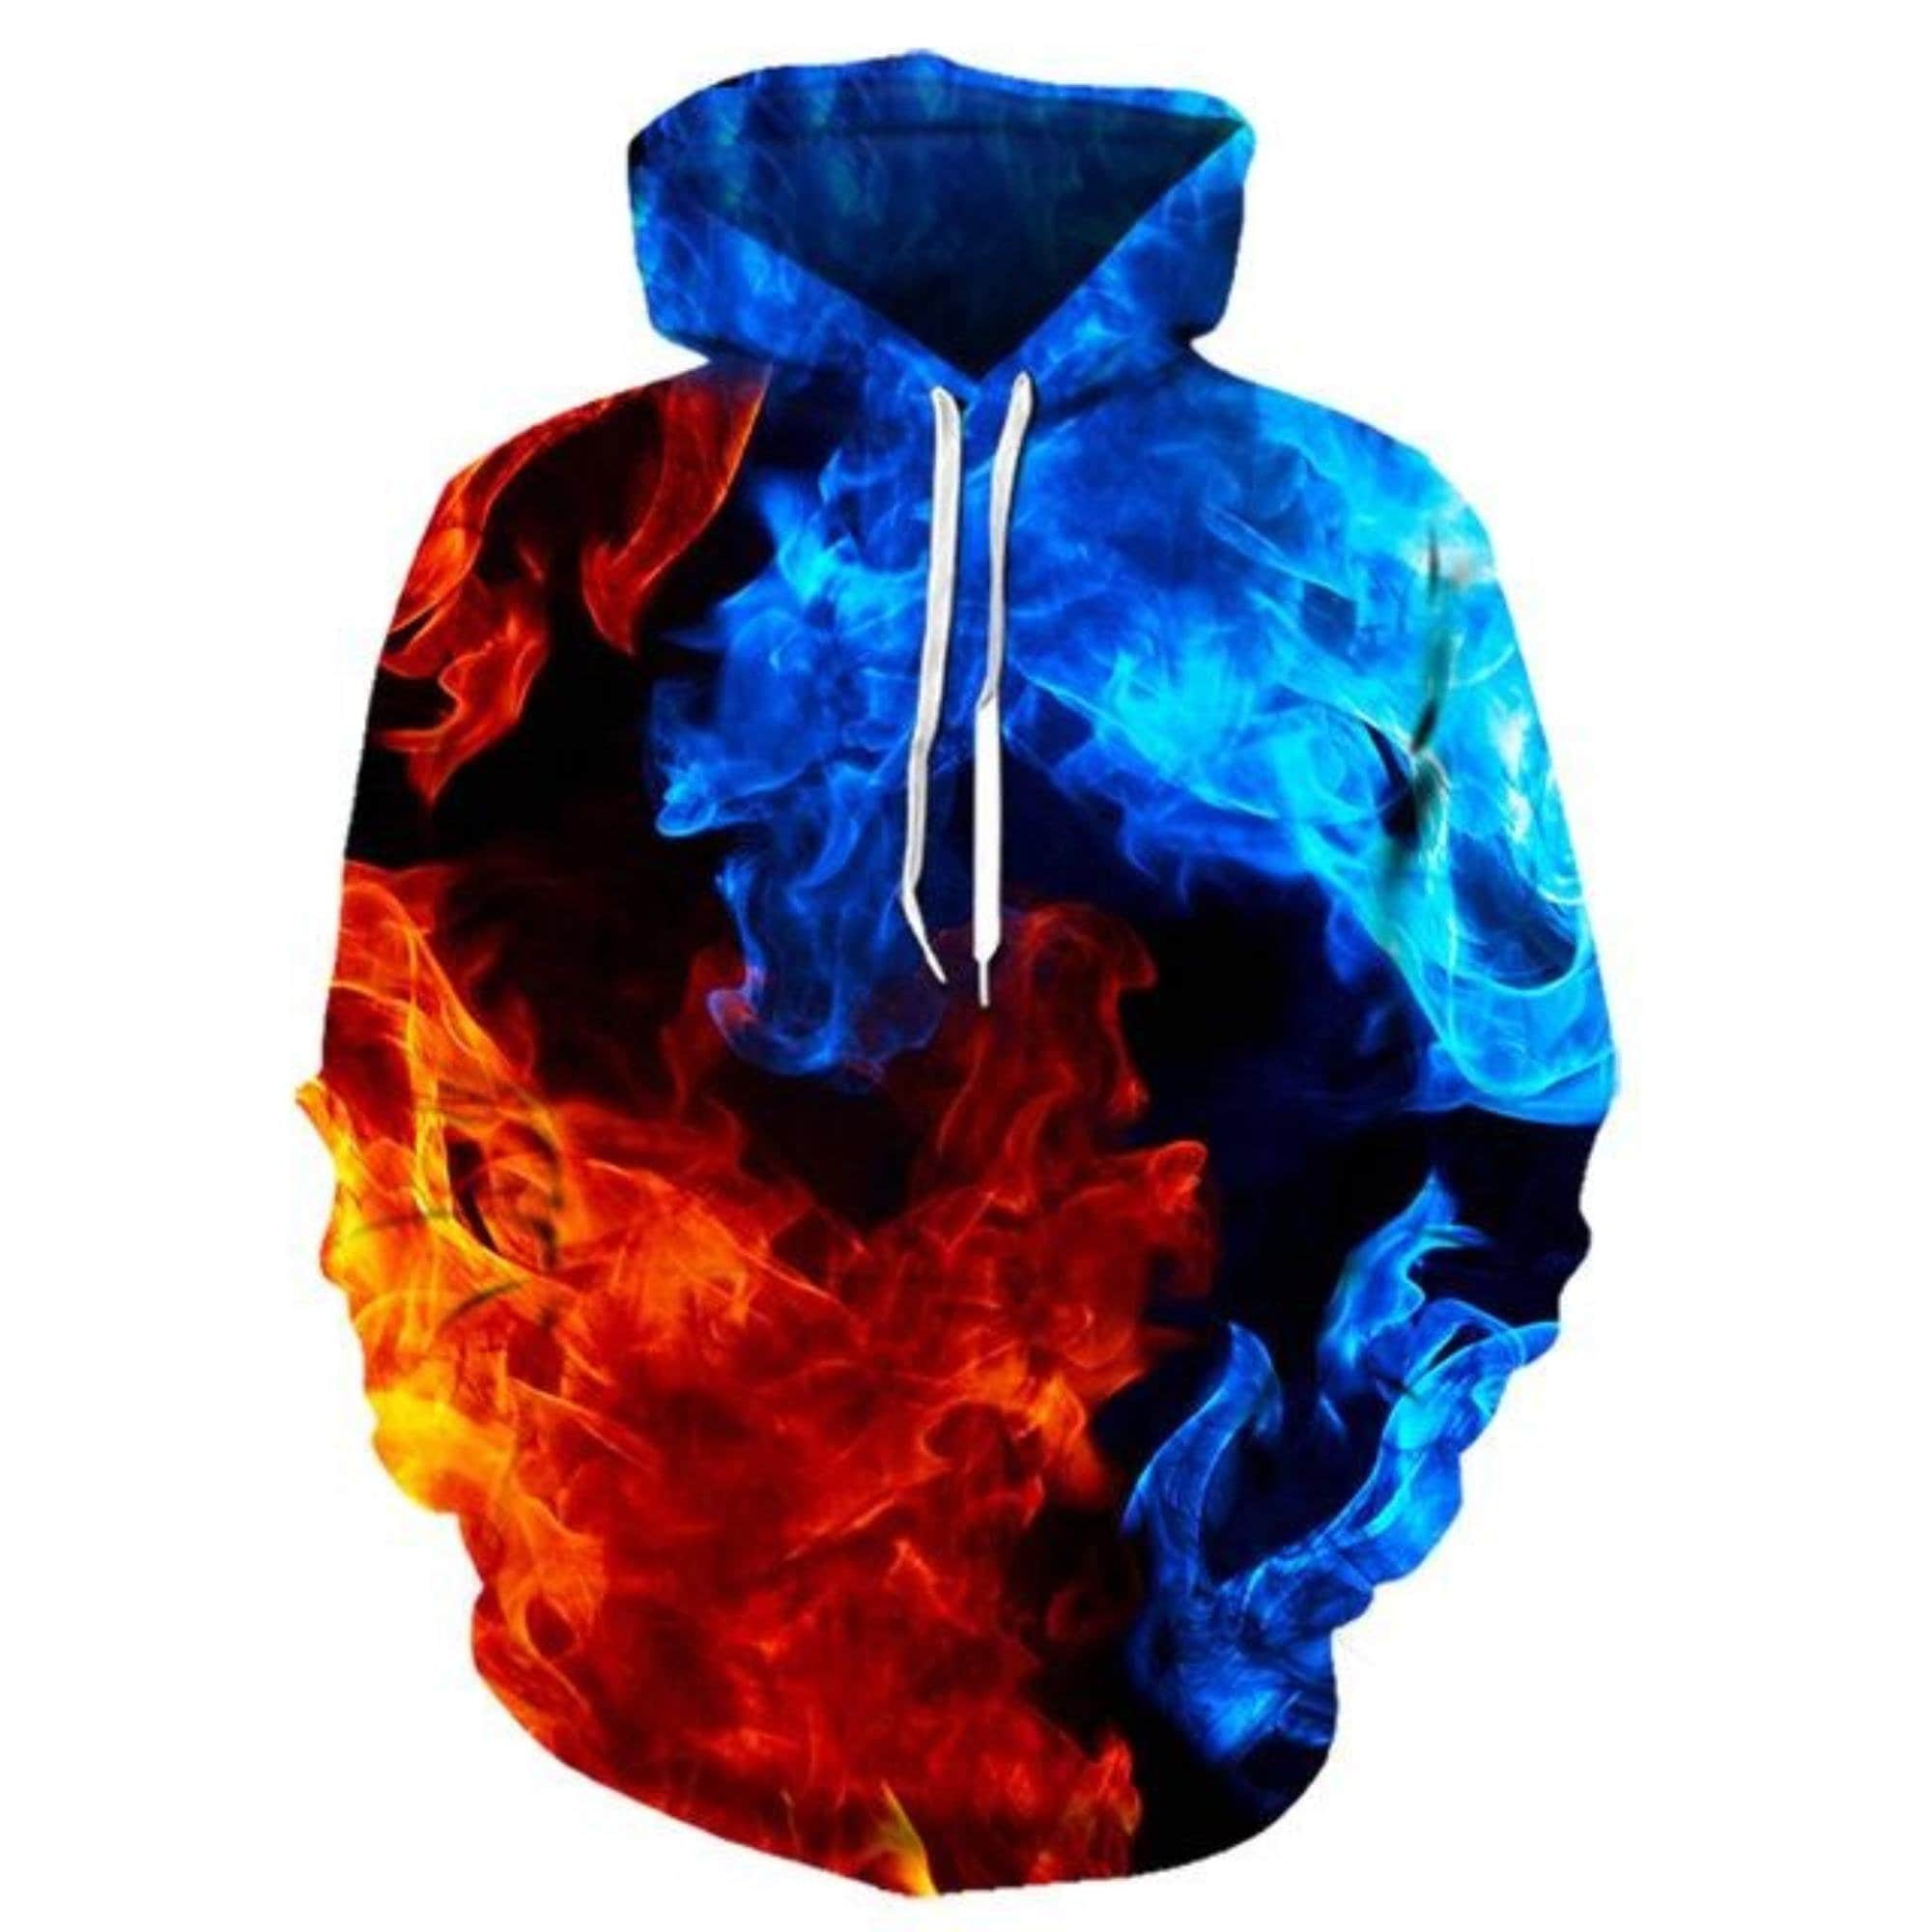 Colorful Flame Hoodie 3D Sweatshirt MenWomen Hooded Autumn And Winter Coat Mens Clothing Funny Jacket Fashion Oversized Hoodie-4